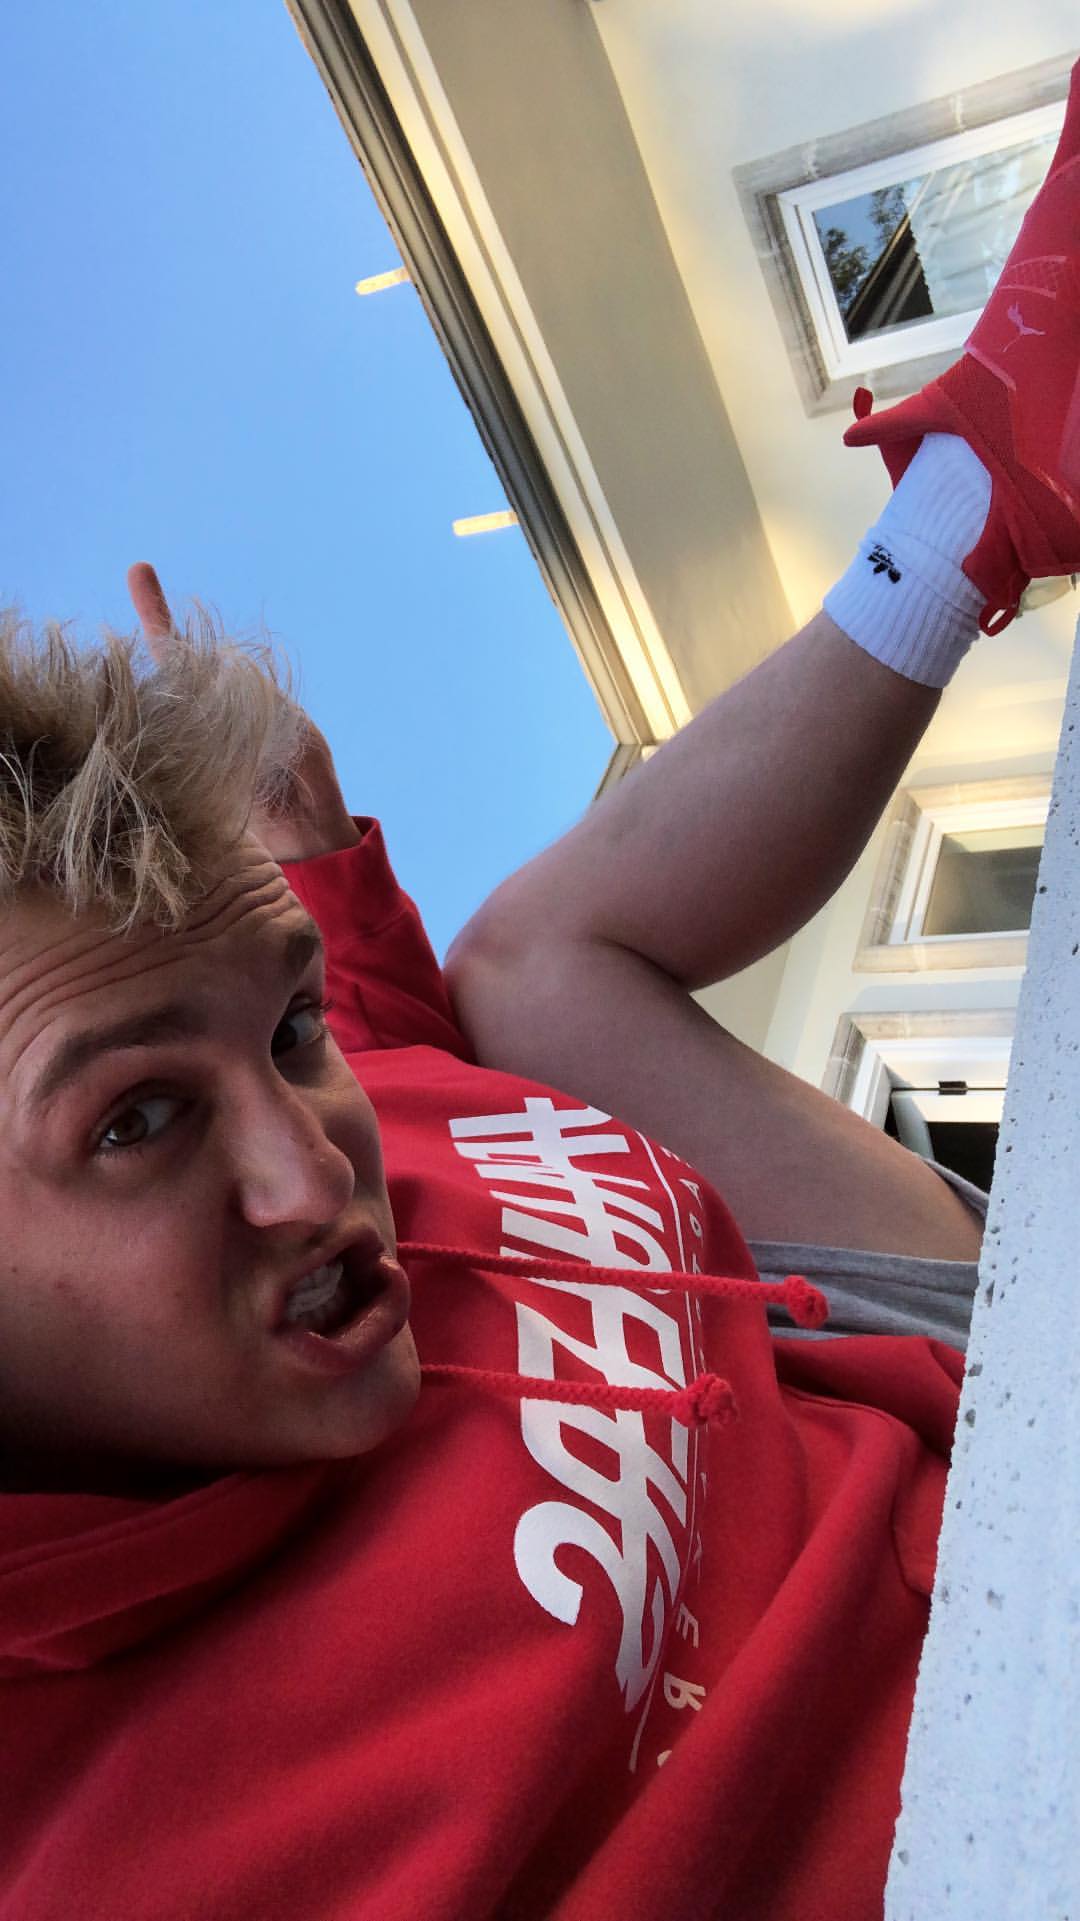 Picture Of Jake Paul In General Pictures Jake Paul 1517532481 Teen Idols 4 You 2859